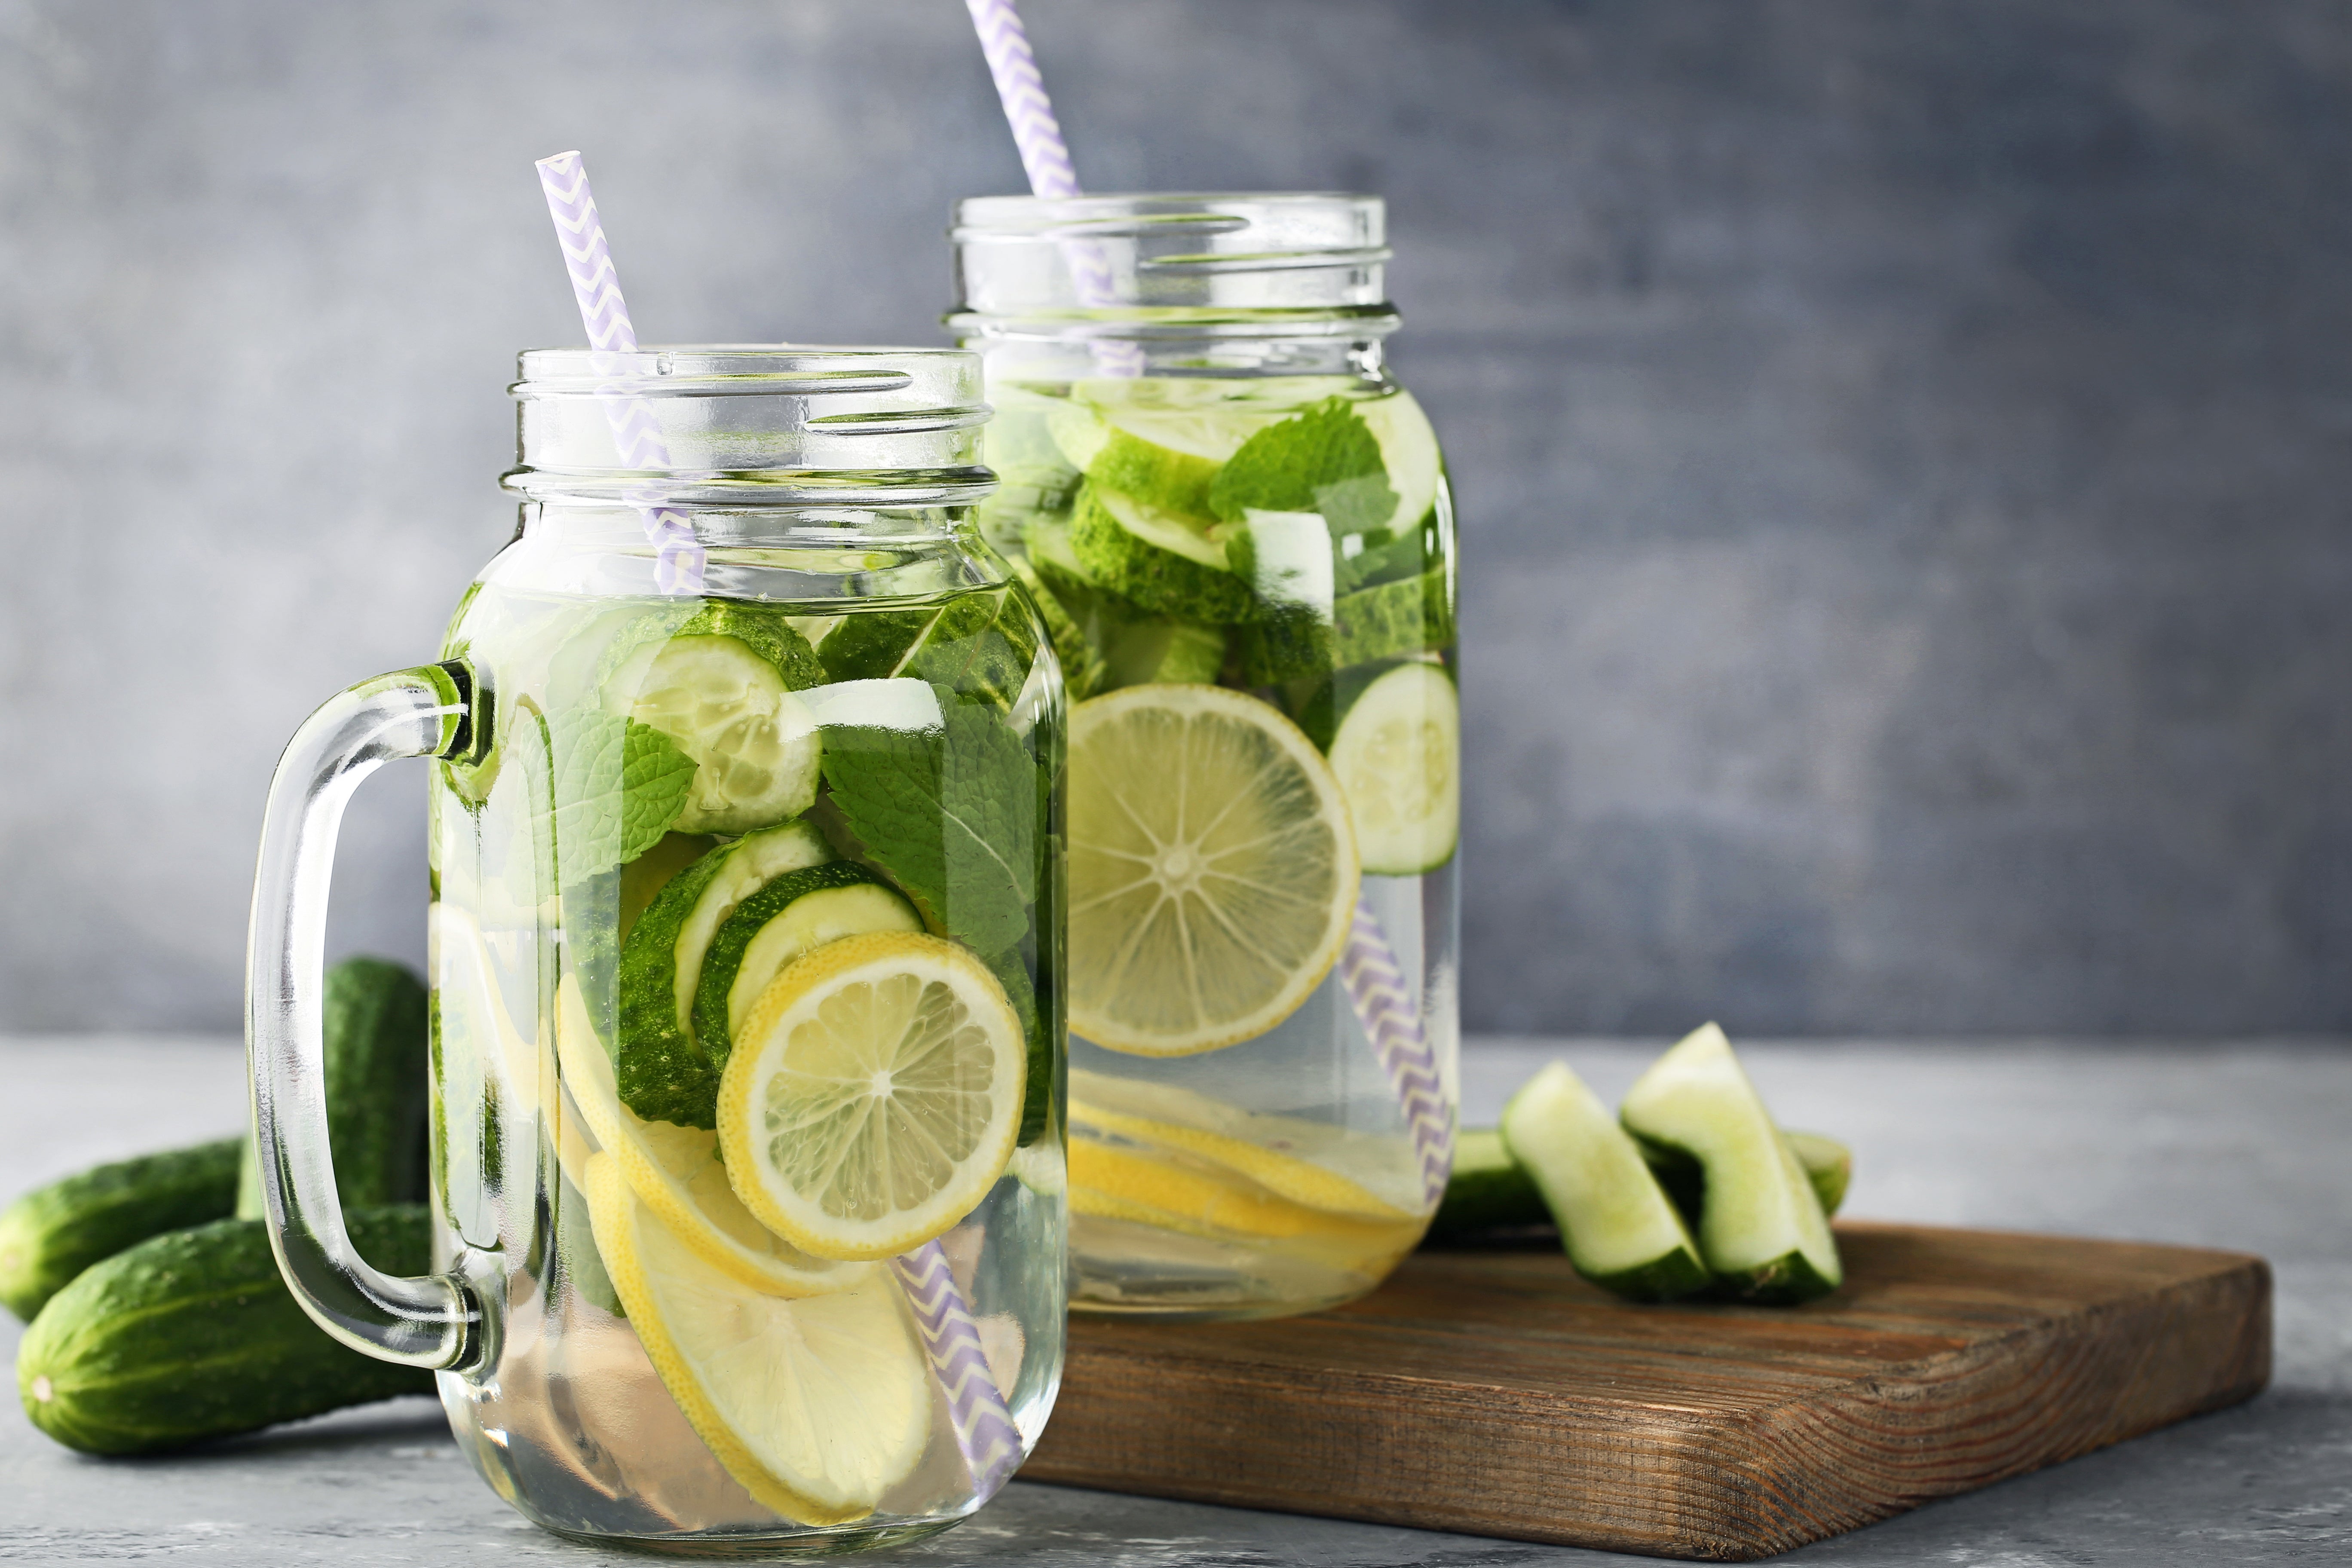 Water for Wellness: How to Make Detox Water